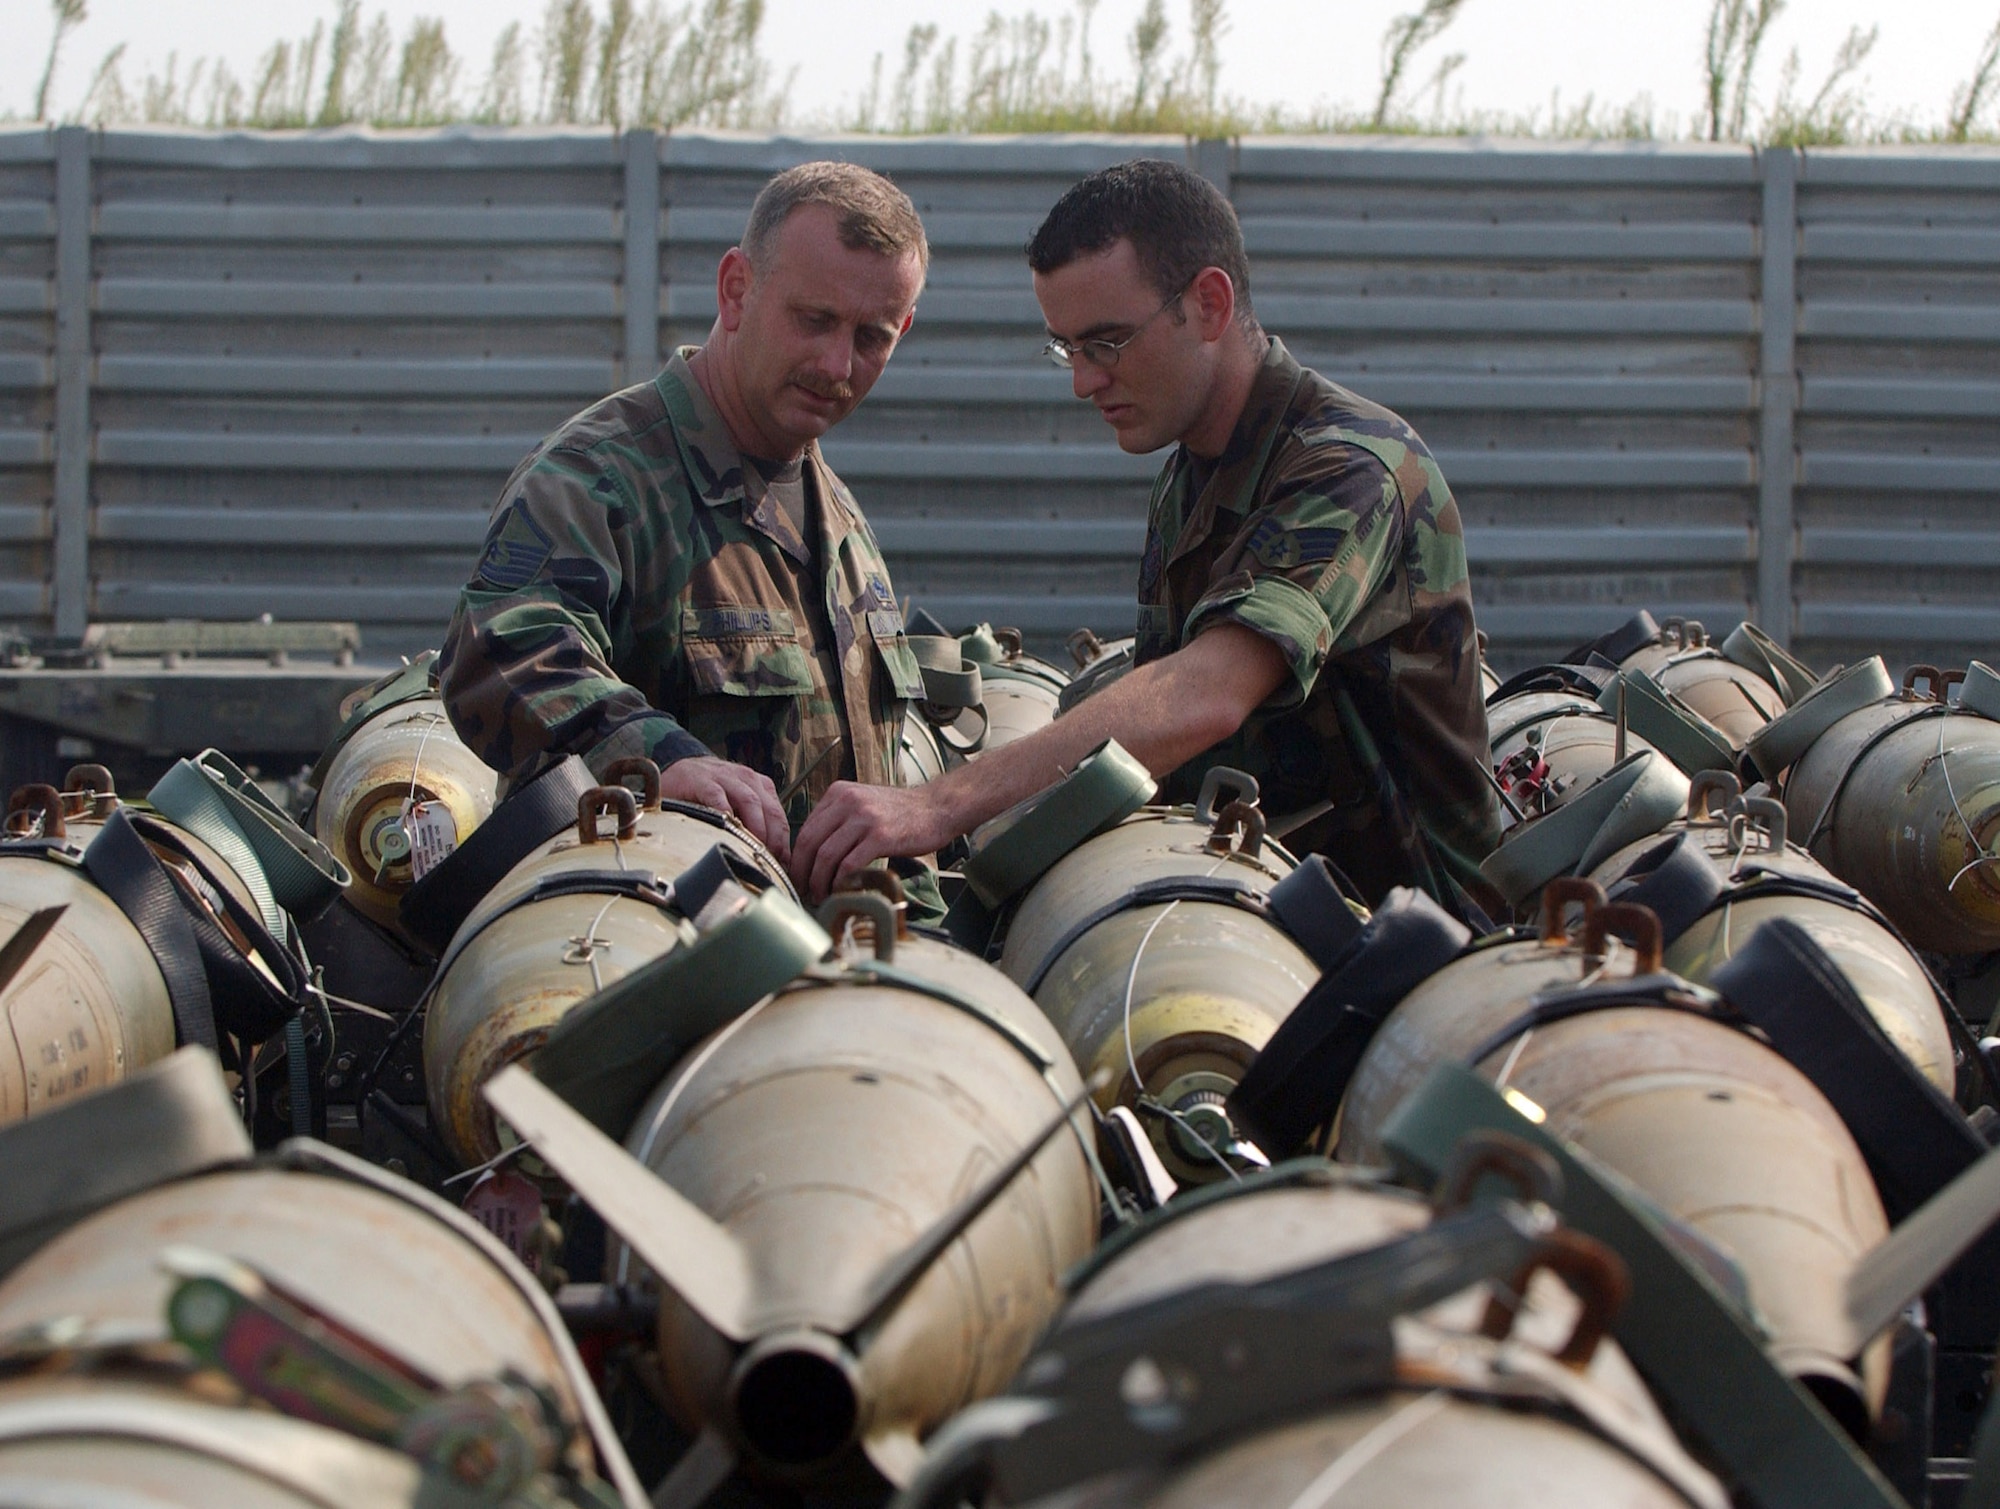 KUNSAN AIR BASE, South Korea -- Master Sgt. Torre Phillips (left), assigned to the 555th Expeditionary Fighter Squadron 'Triple Nickel" from Aviano AB, Italy, inspects an MK-82 bomb with his son Senior Airman David Phillips, 8th Maintenance Squadron Sept. 13. Sergeant Phillips is deployed here for a four-month rotation while his son completes his one-year remote tour here. (U.S. Air Force photo/Senior Airman Steven Doty)                               